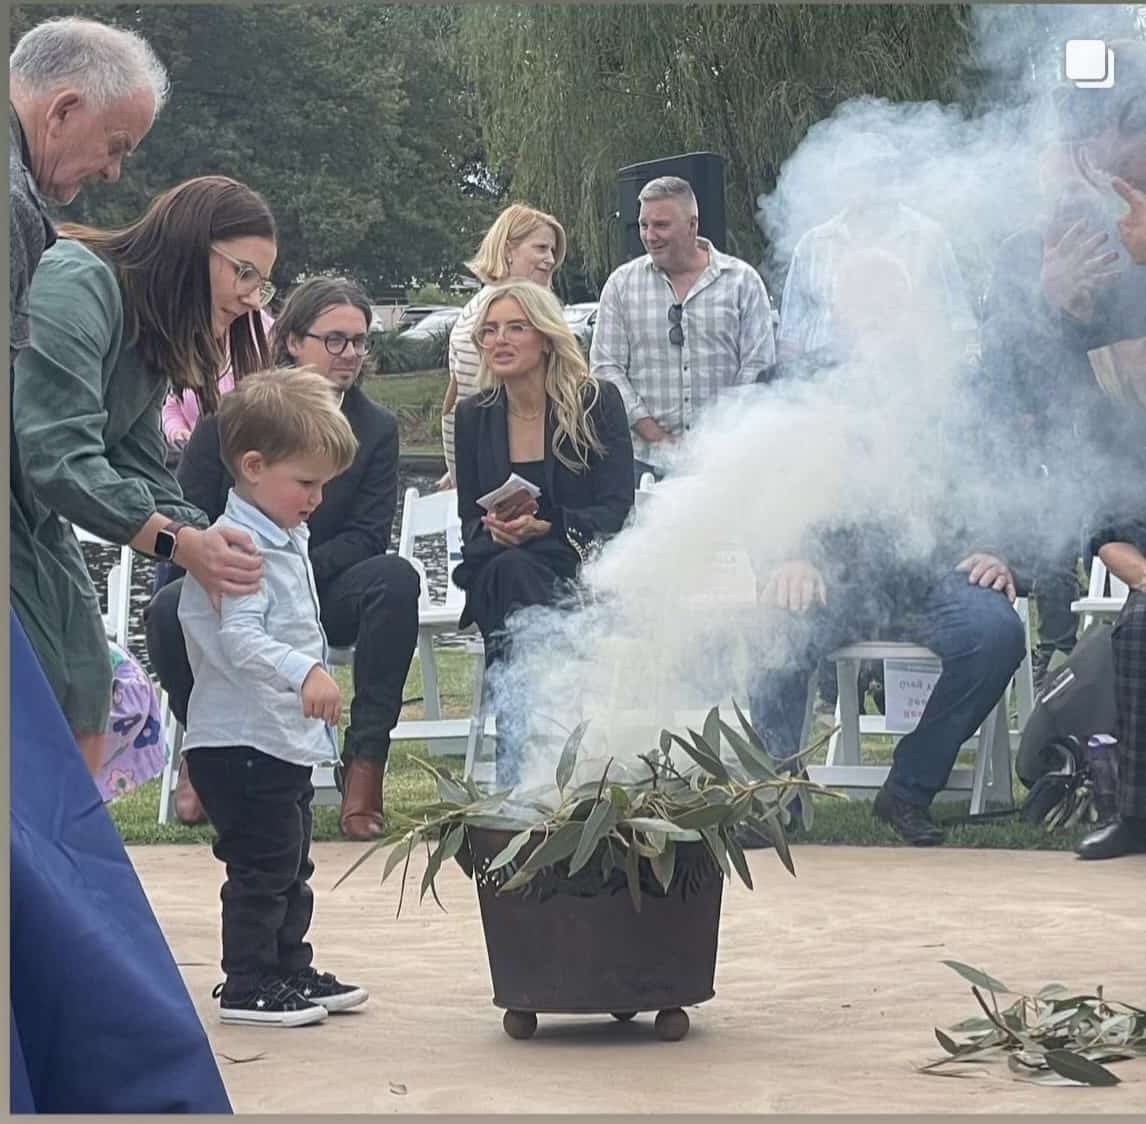 A young boy wearing a blue shirt adding leaves to the fire at the smoking ceremony